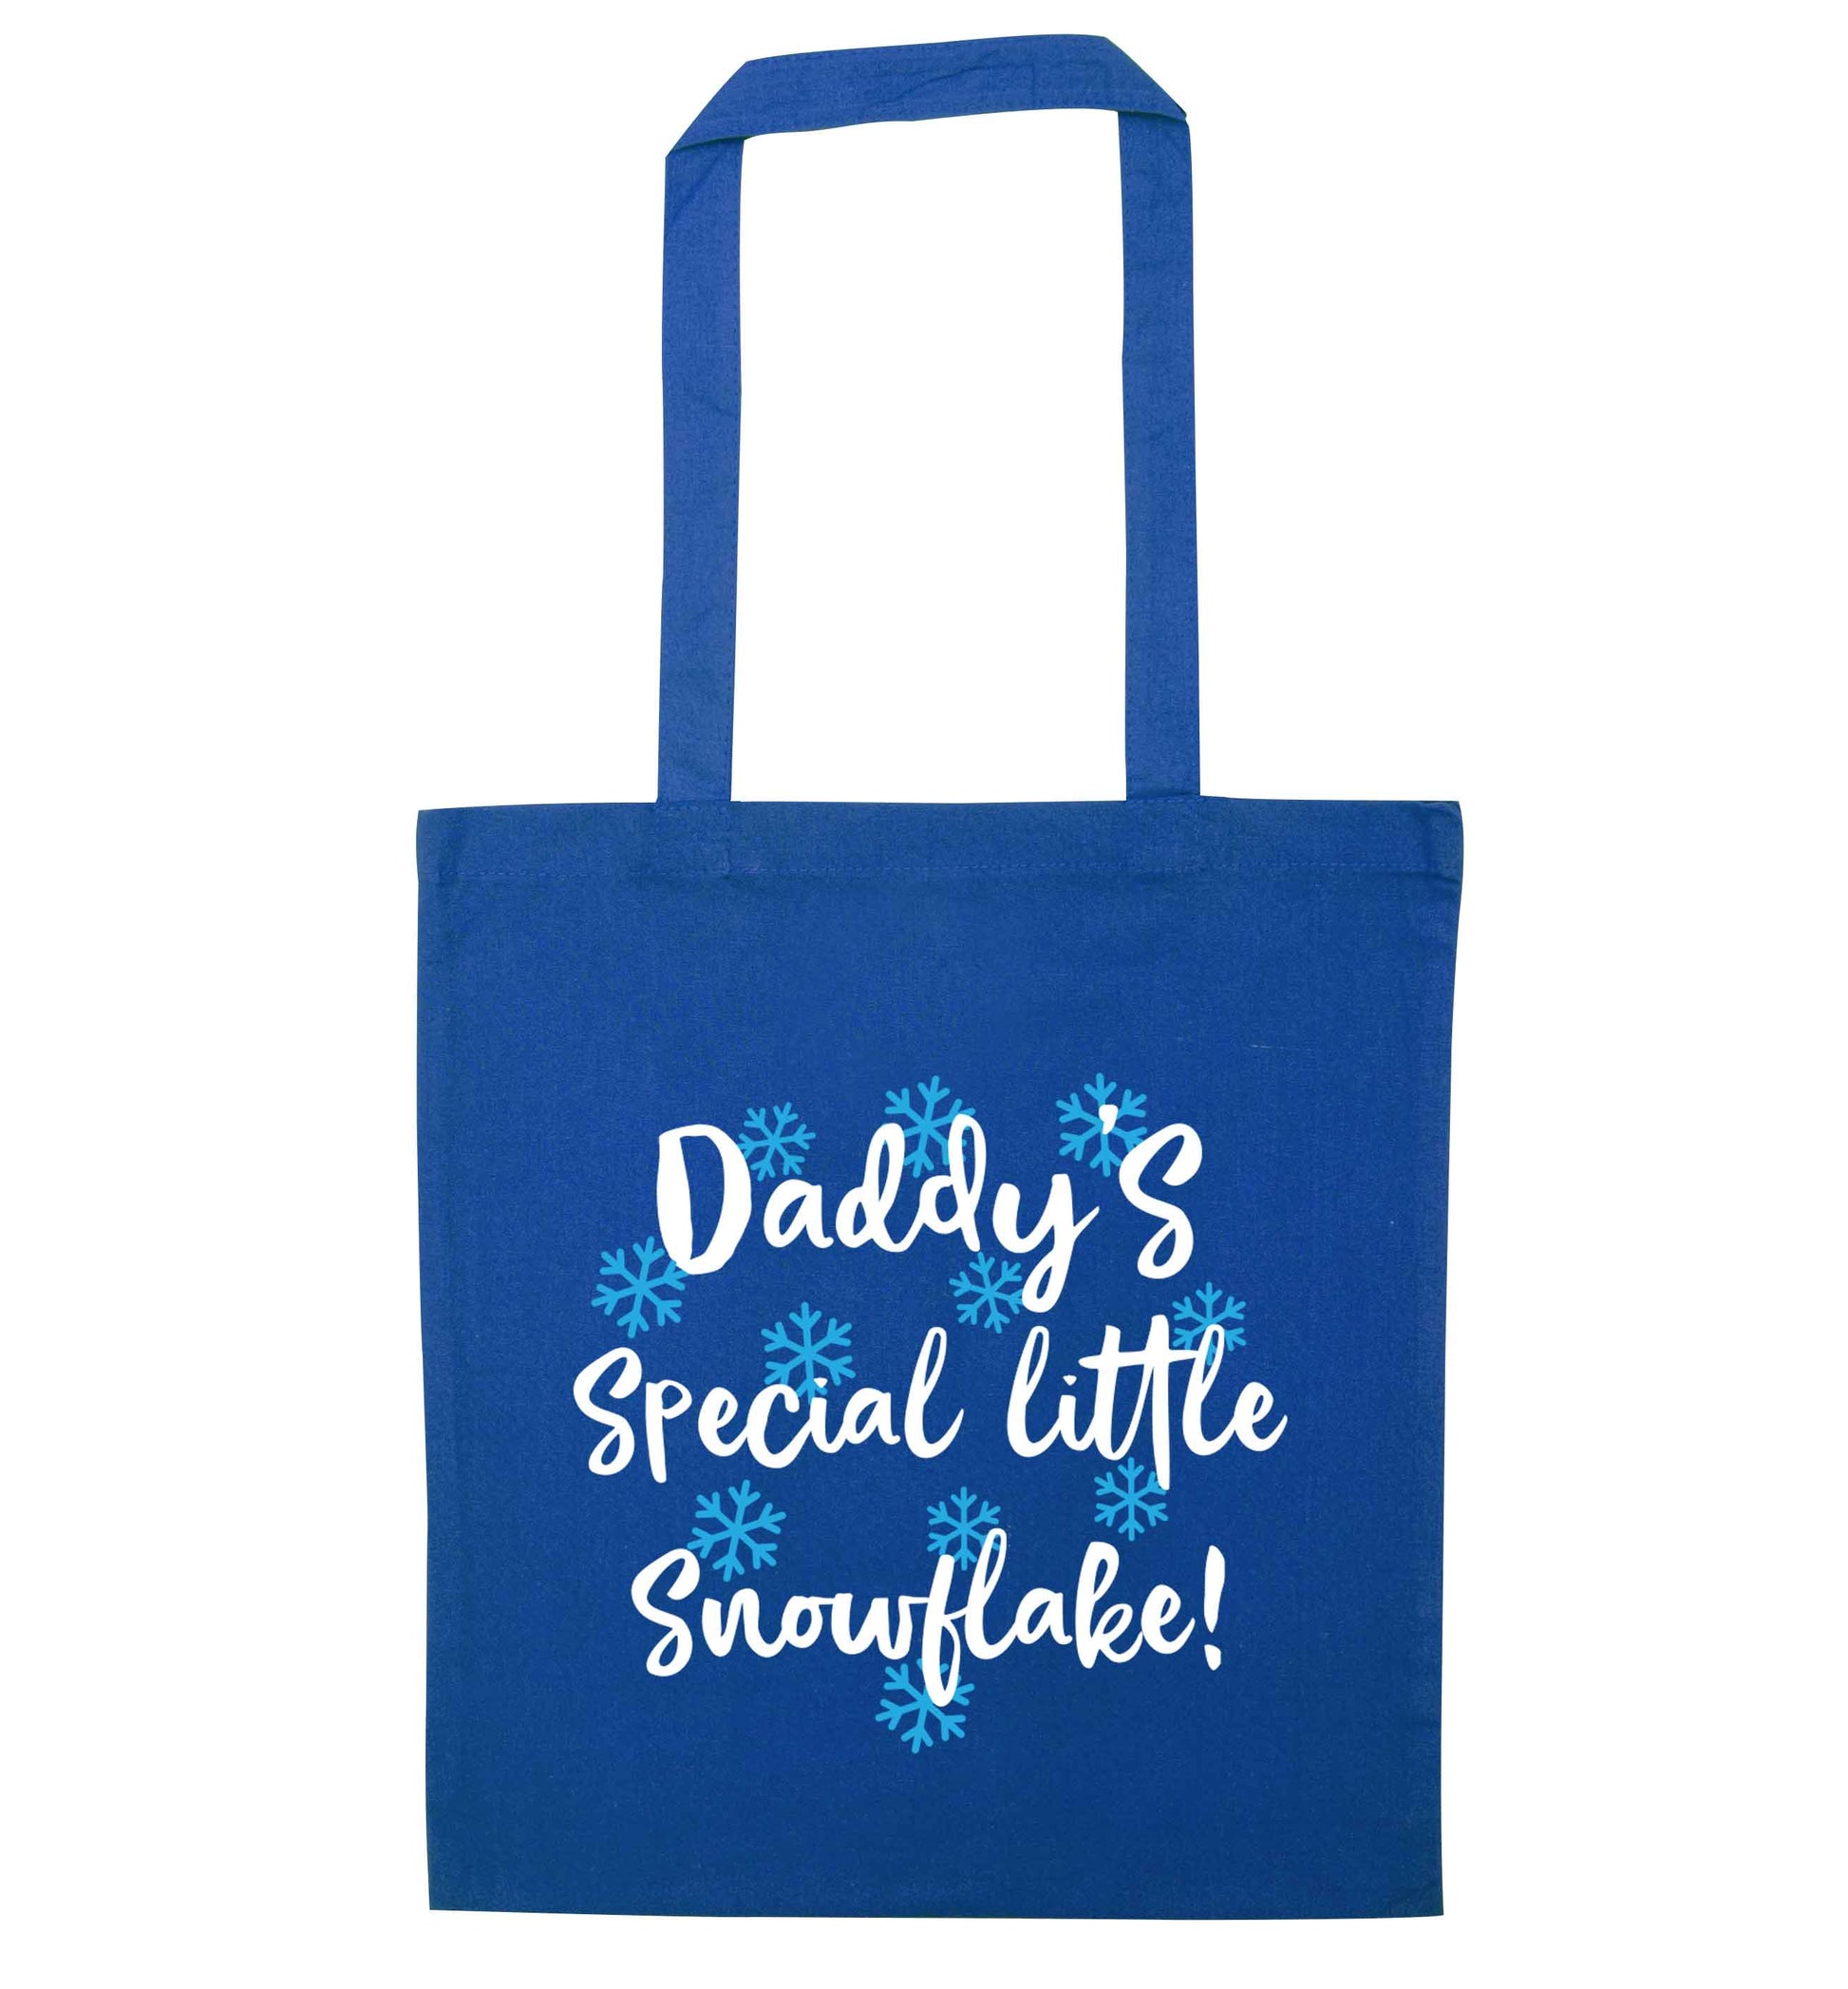 Daddy's special little snowflake blue tote bag